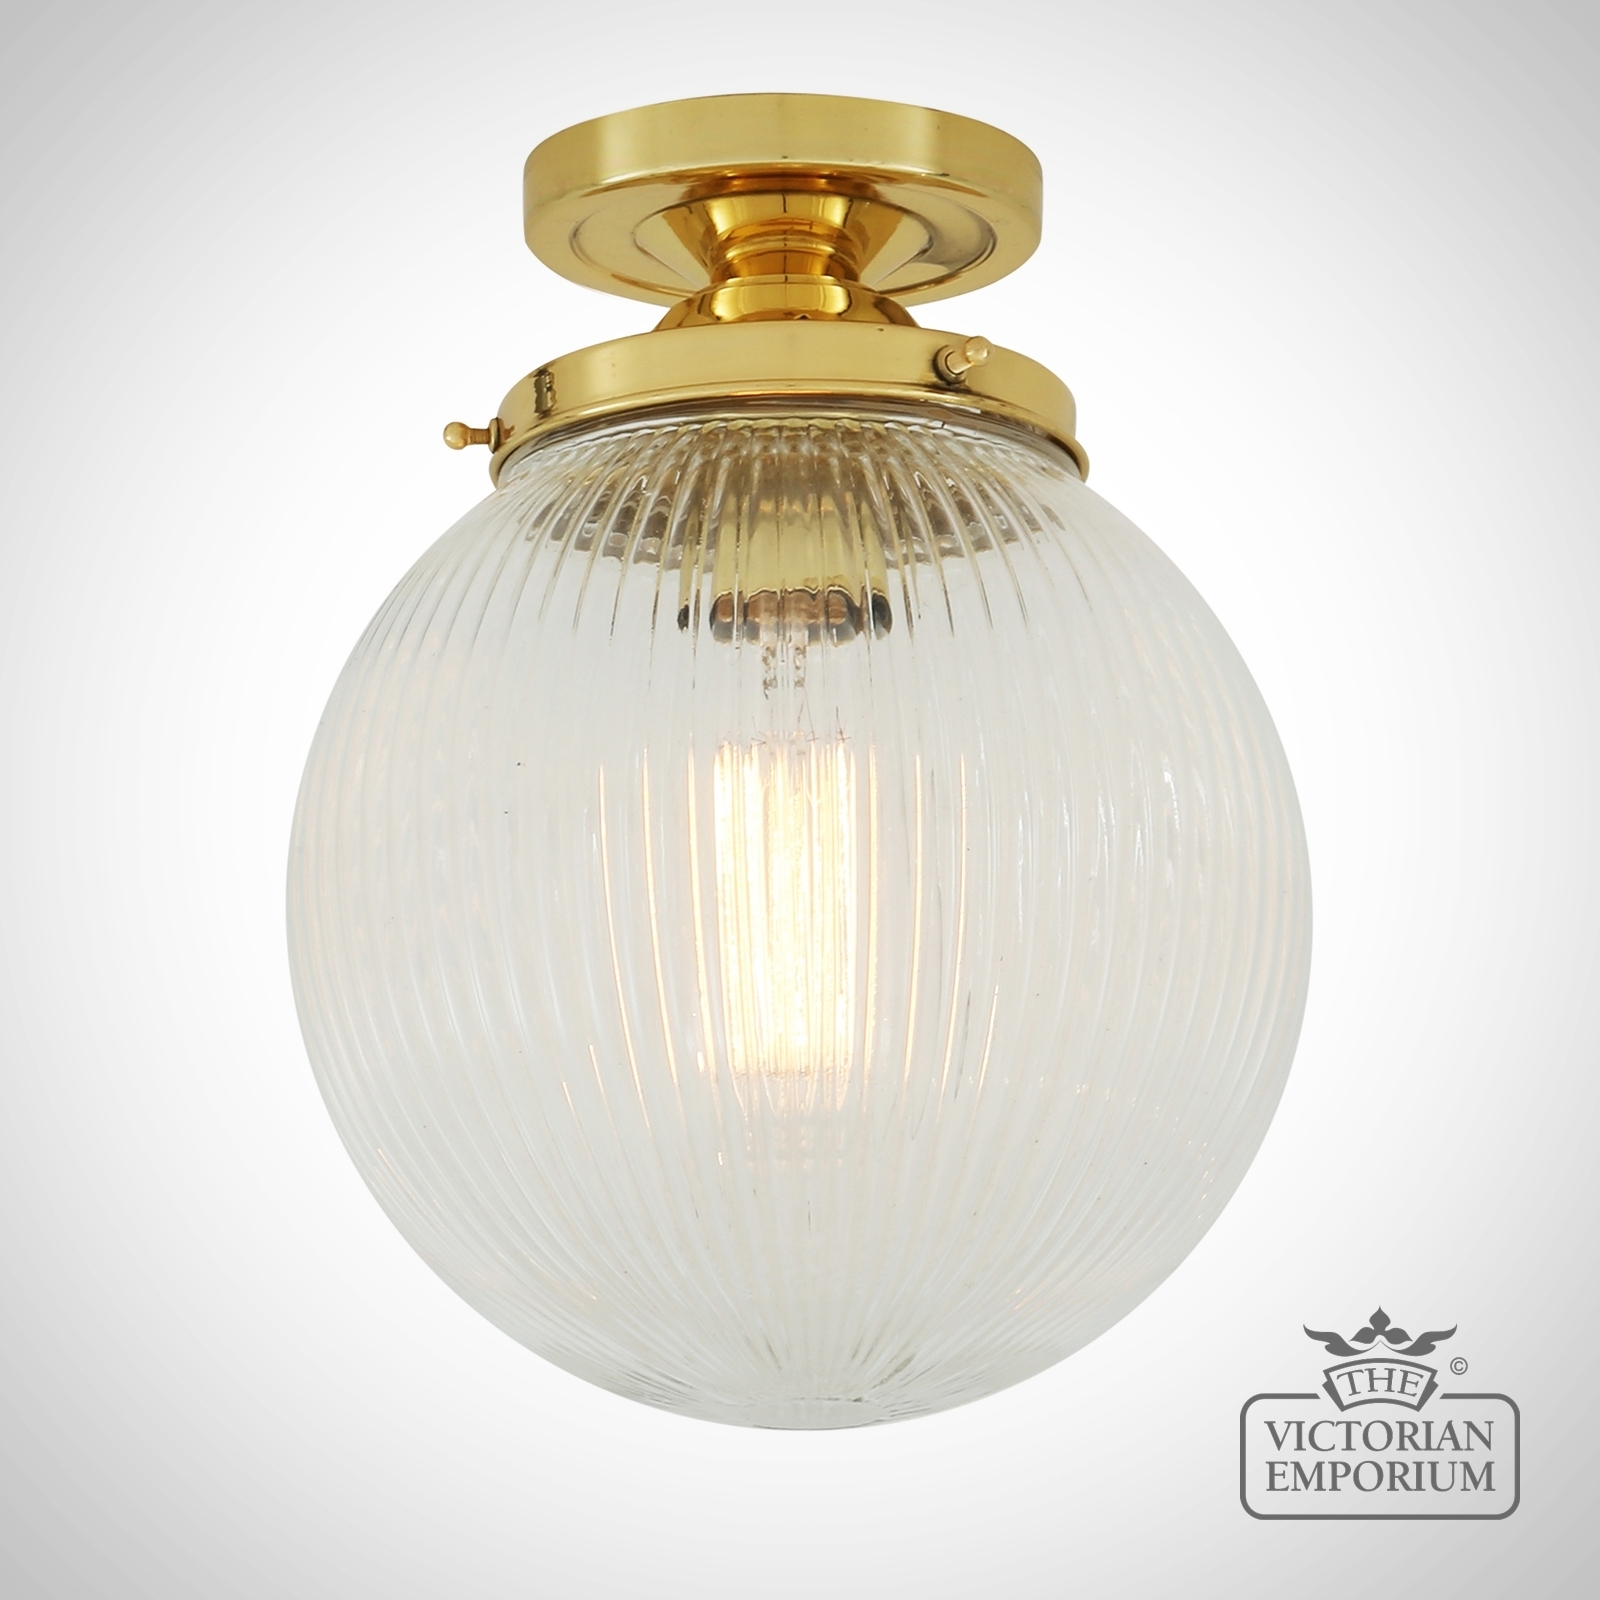 Stanley Fluted Globe Ceiling Light in a choice of finishes